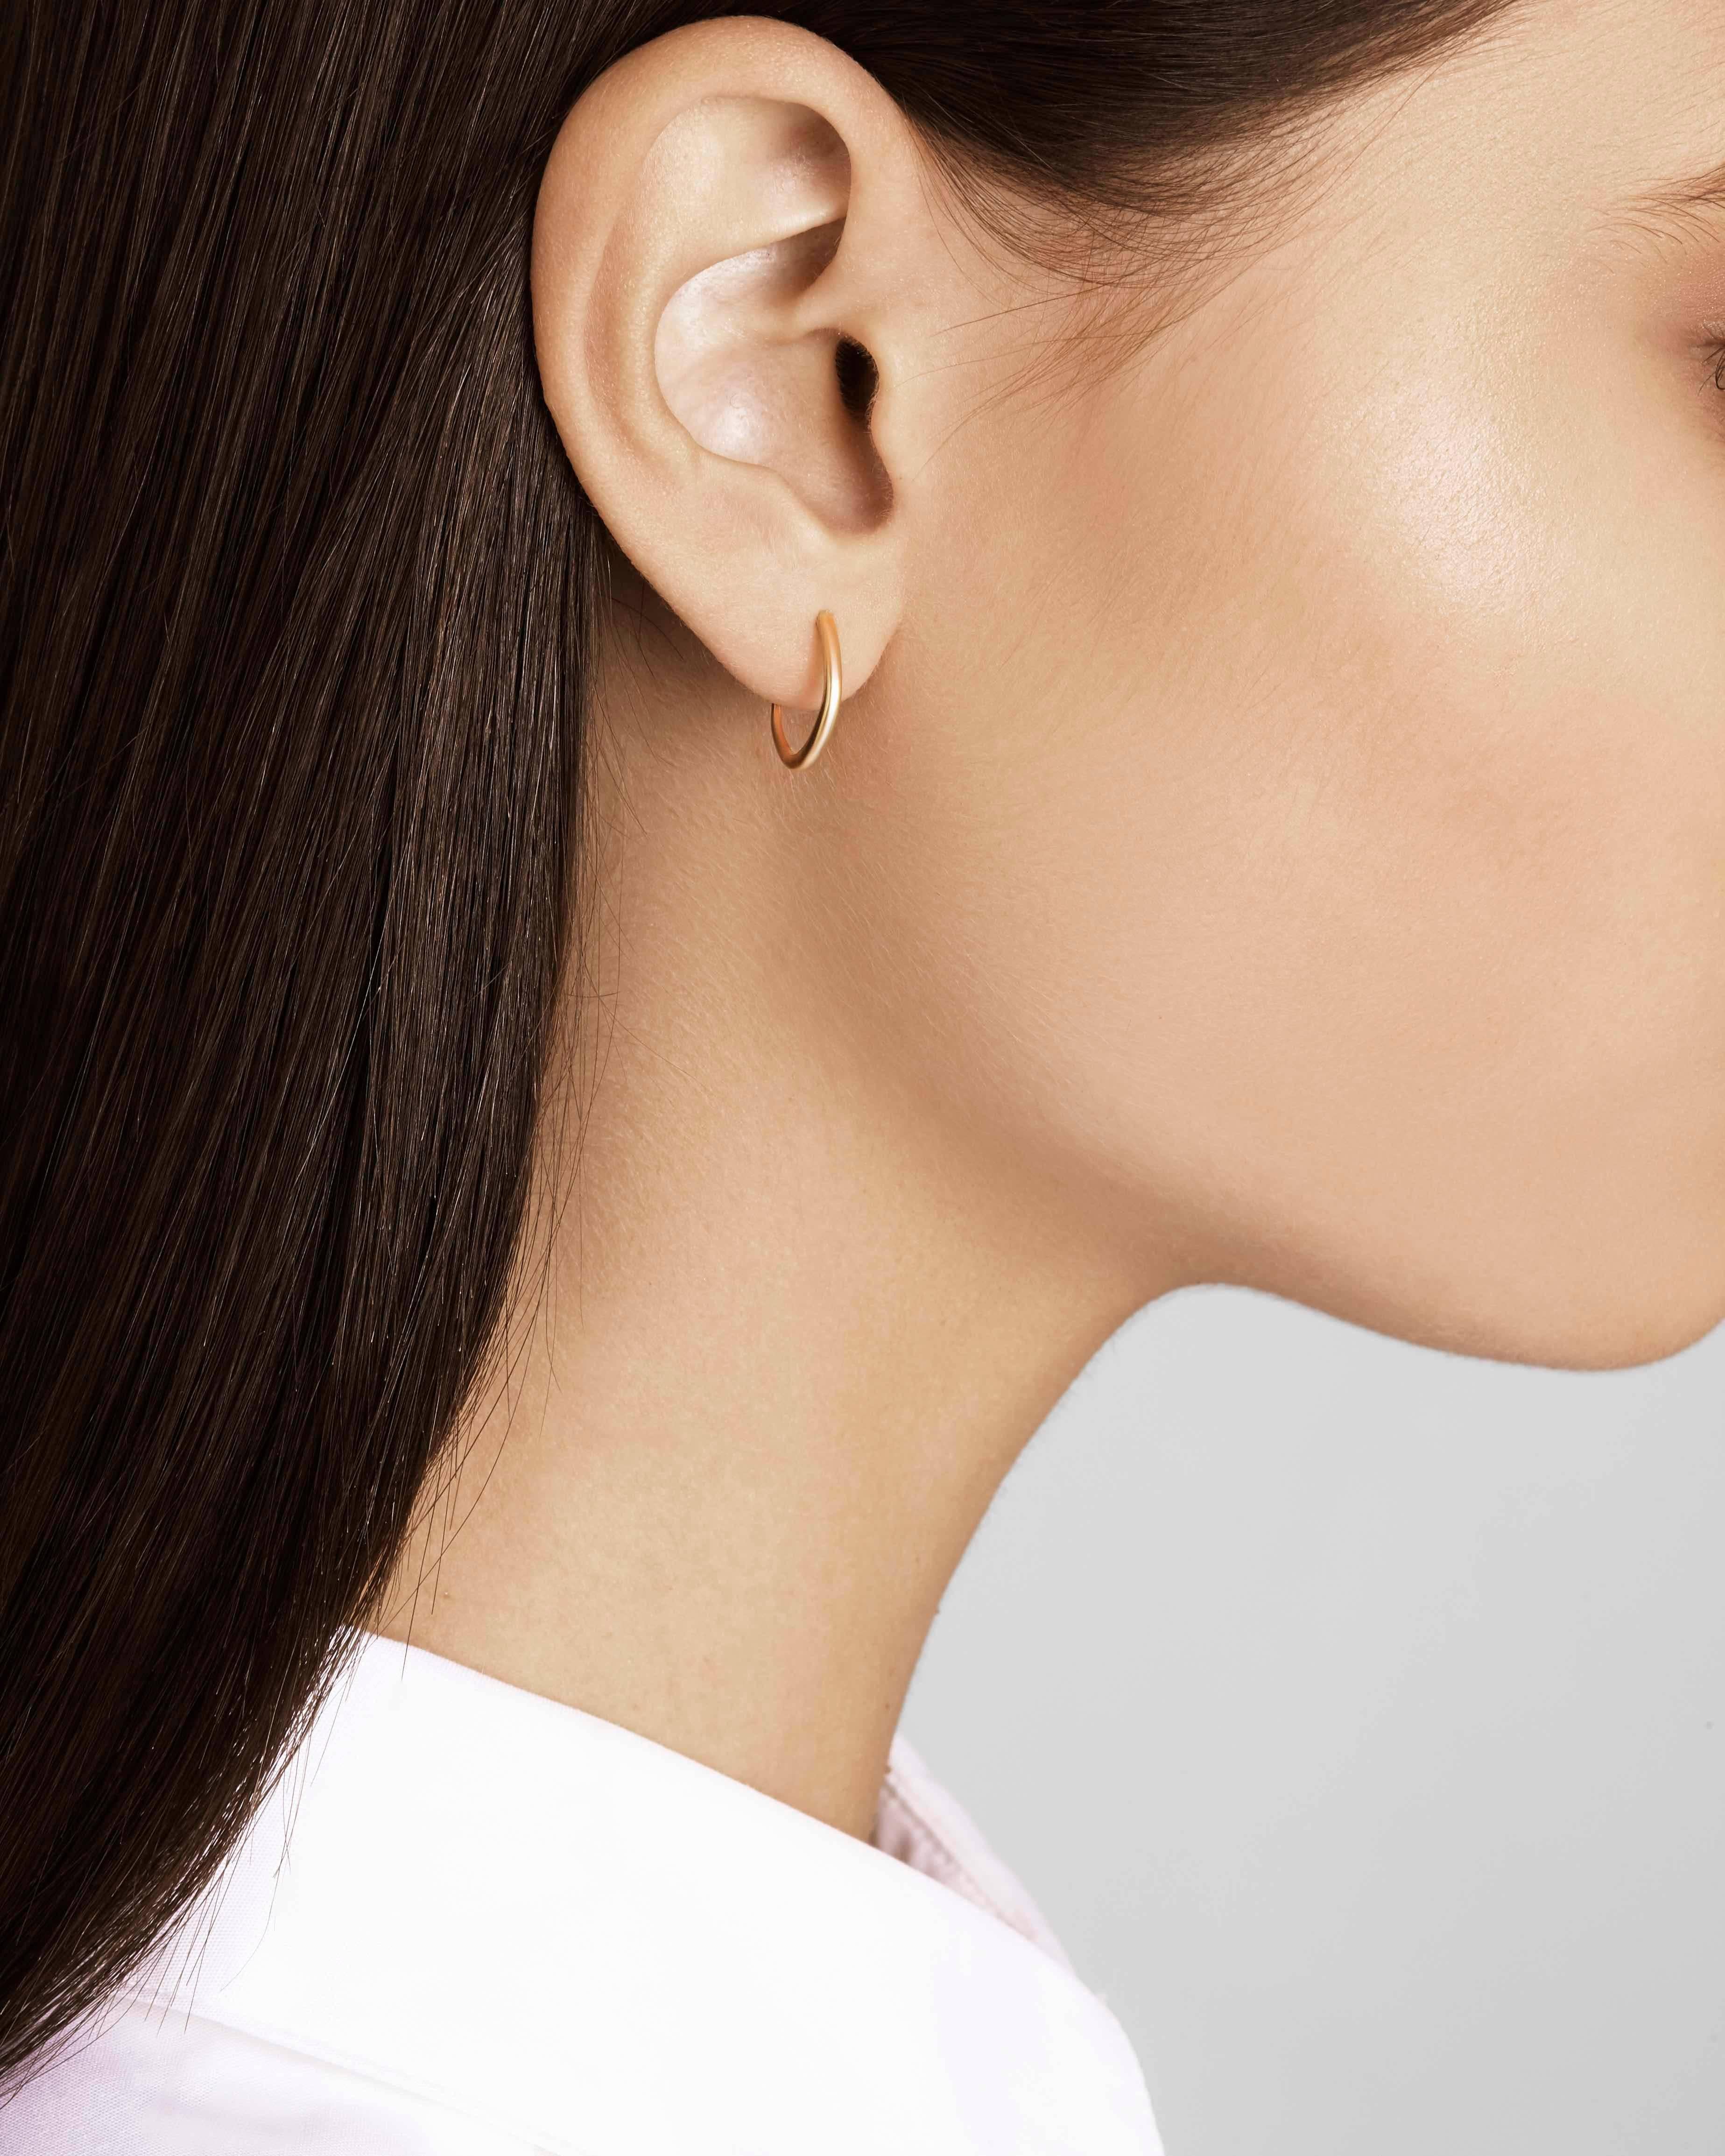 These delicate hoop earrings are crafted in solid 18-carat gold with a post and butterfly closure.  Modelled after traditional Touareg jewellery, these earrings are a bohemian take on the classic gold hoop.  These earrings are made to order; please